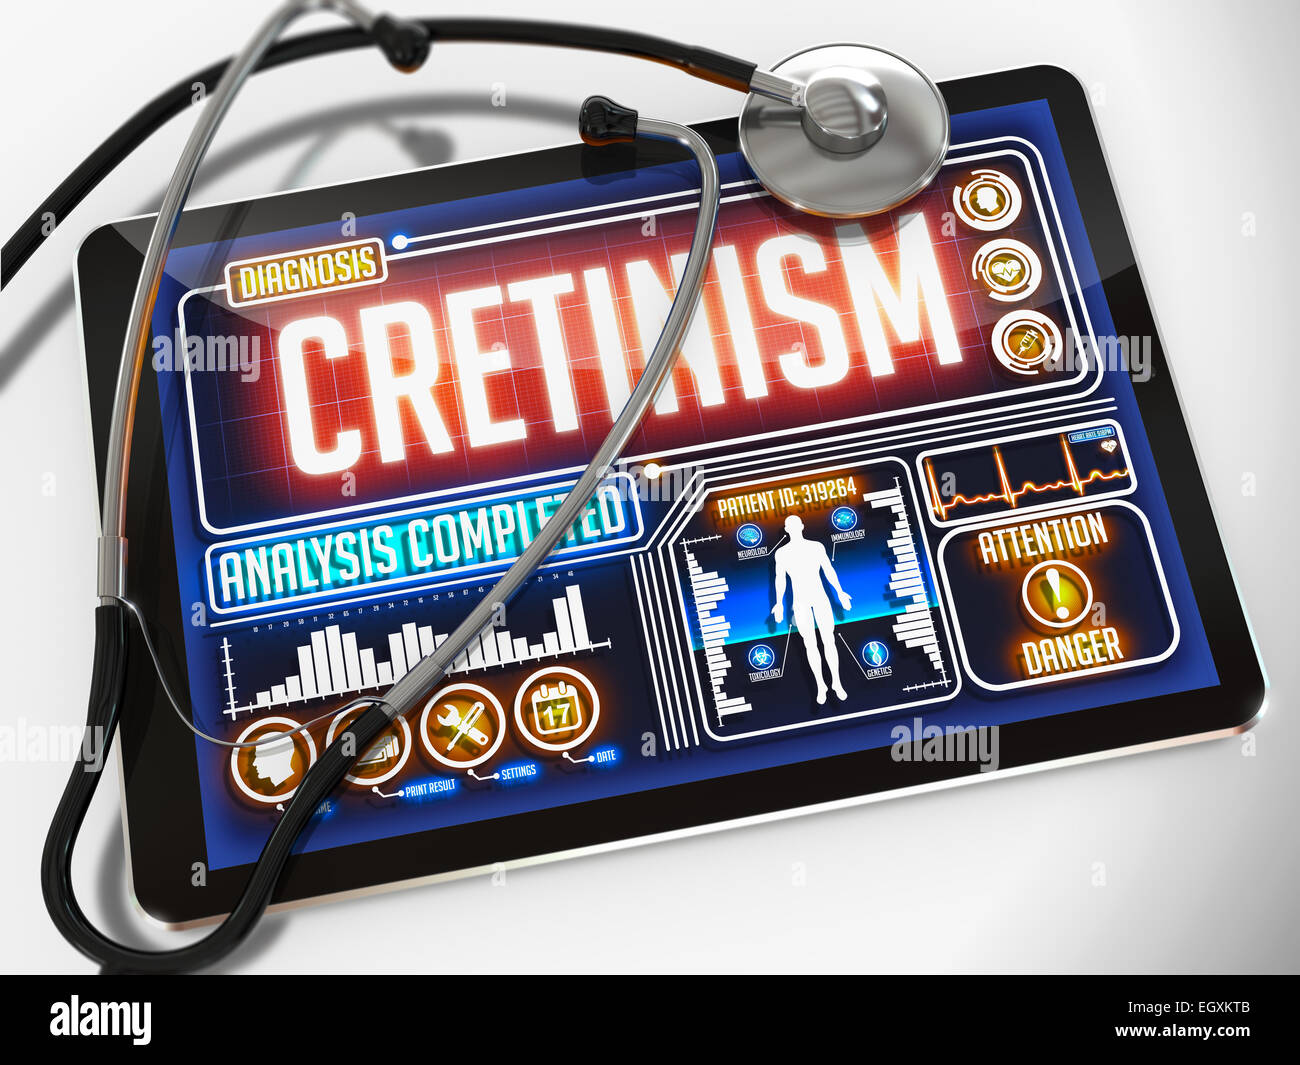 Cretinism Hi Res Stock Photography And Images Alamy